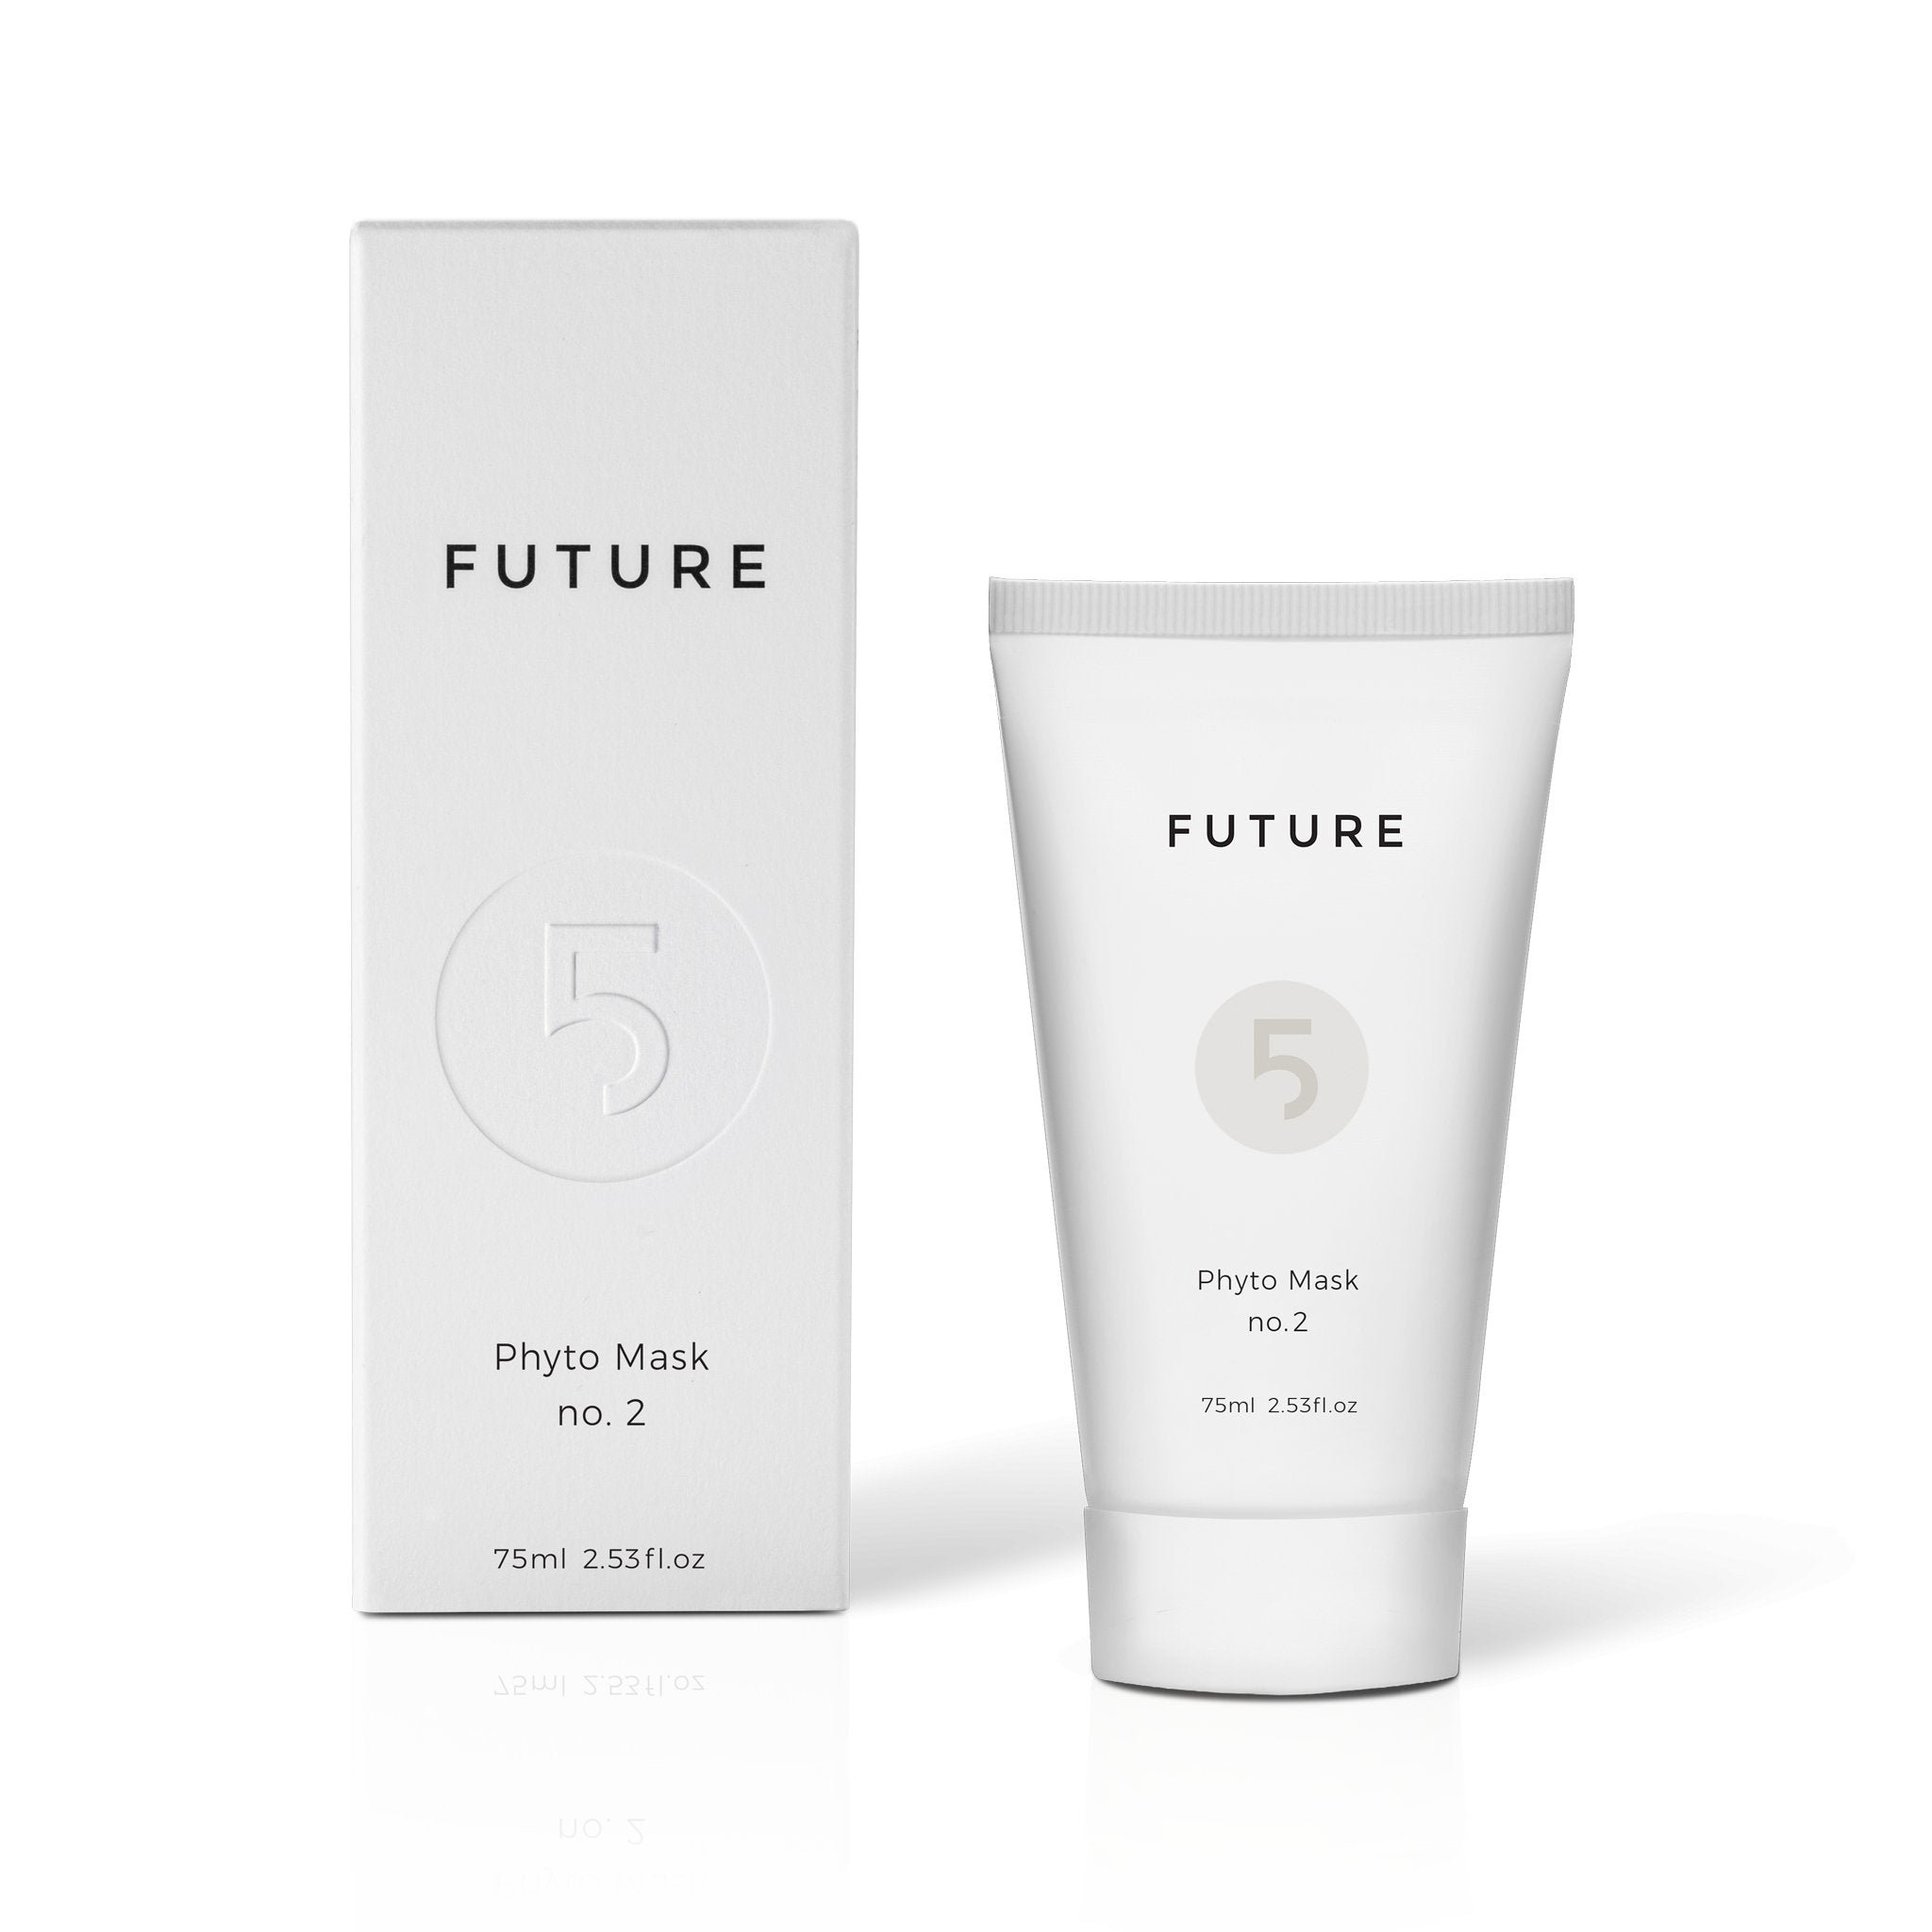 Phyto Mask No 2 - Future Cosmetics The 5 Elements